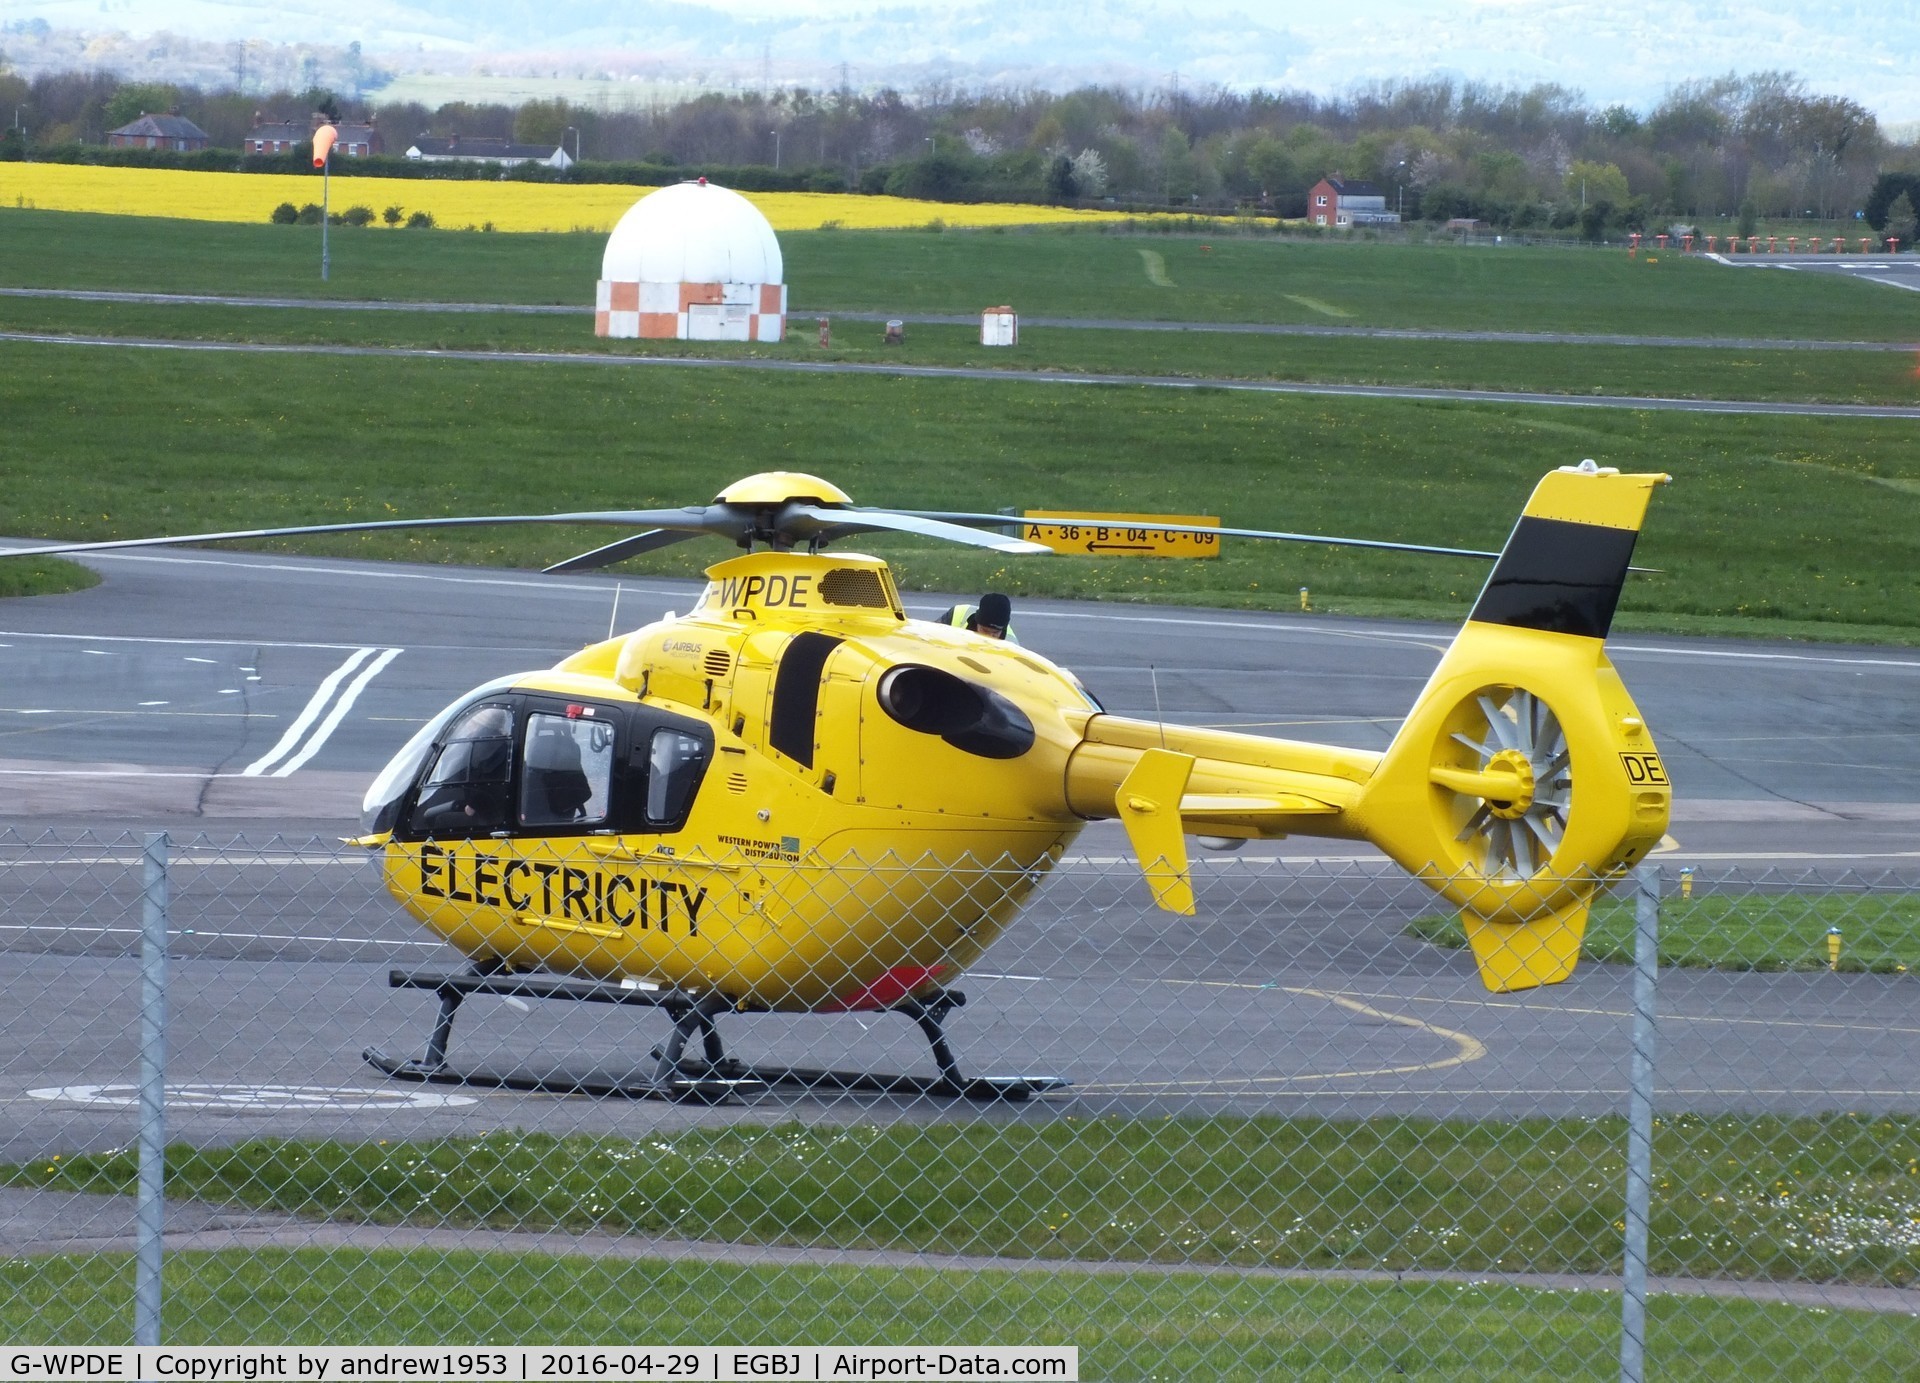 G-WPDE, 2015 Airbus Helicopters EC-135P-2+ C/N 1145, G-WPDE at Gloucestershire Airport.